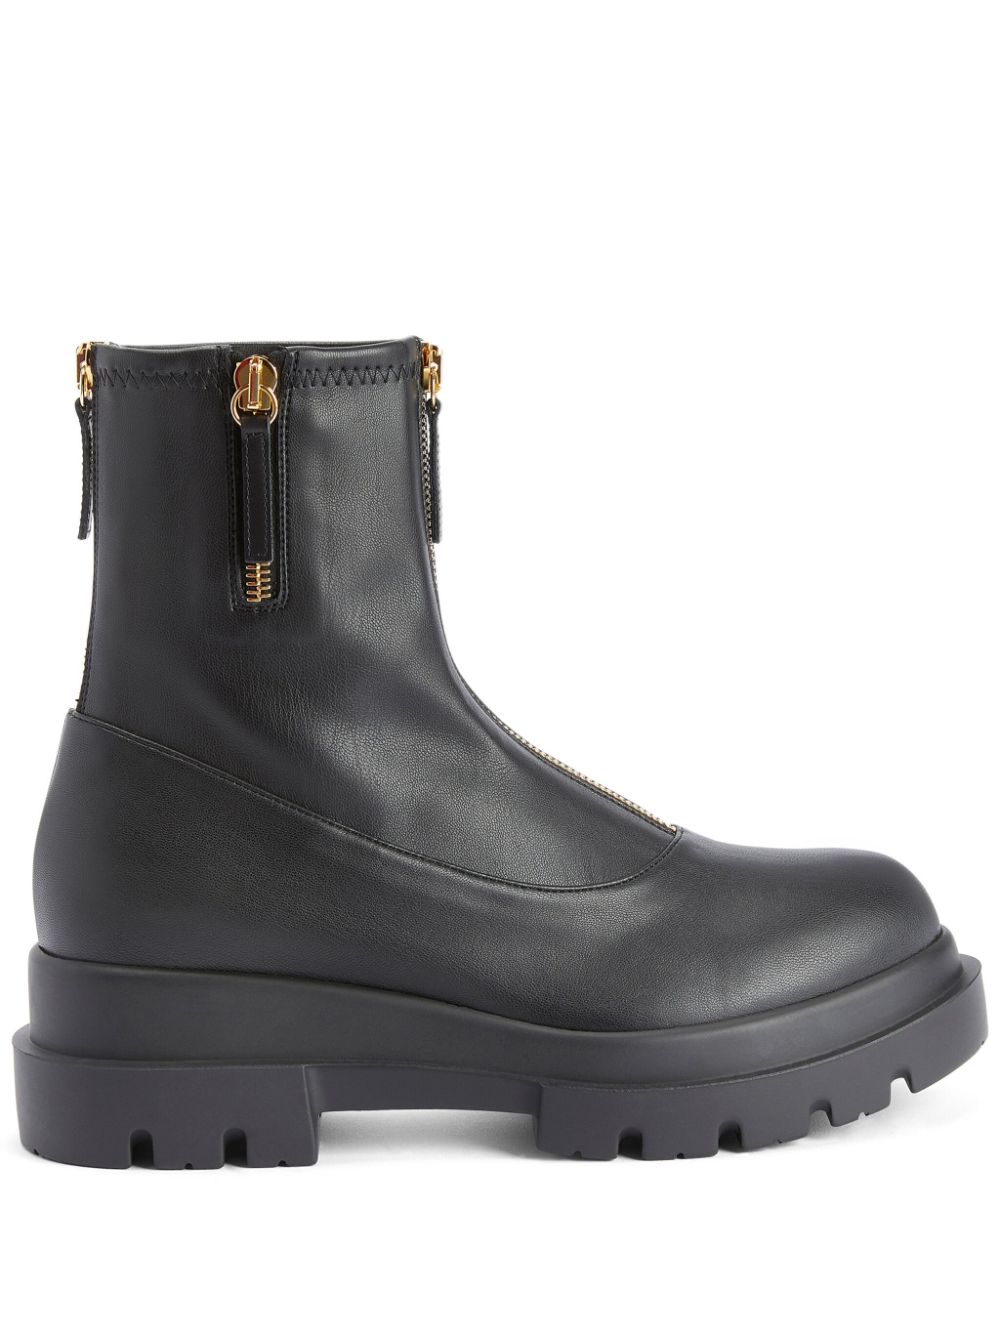 Avide zip-up ankle boots